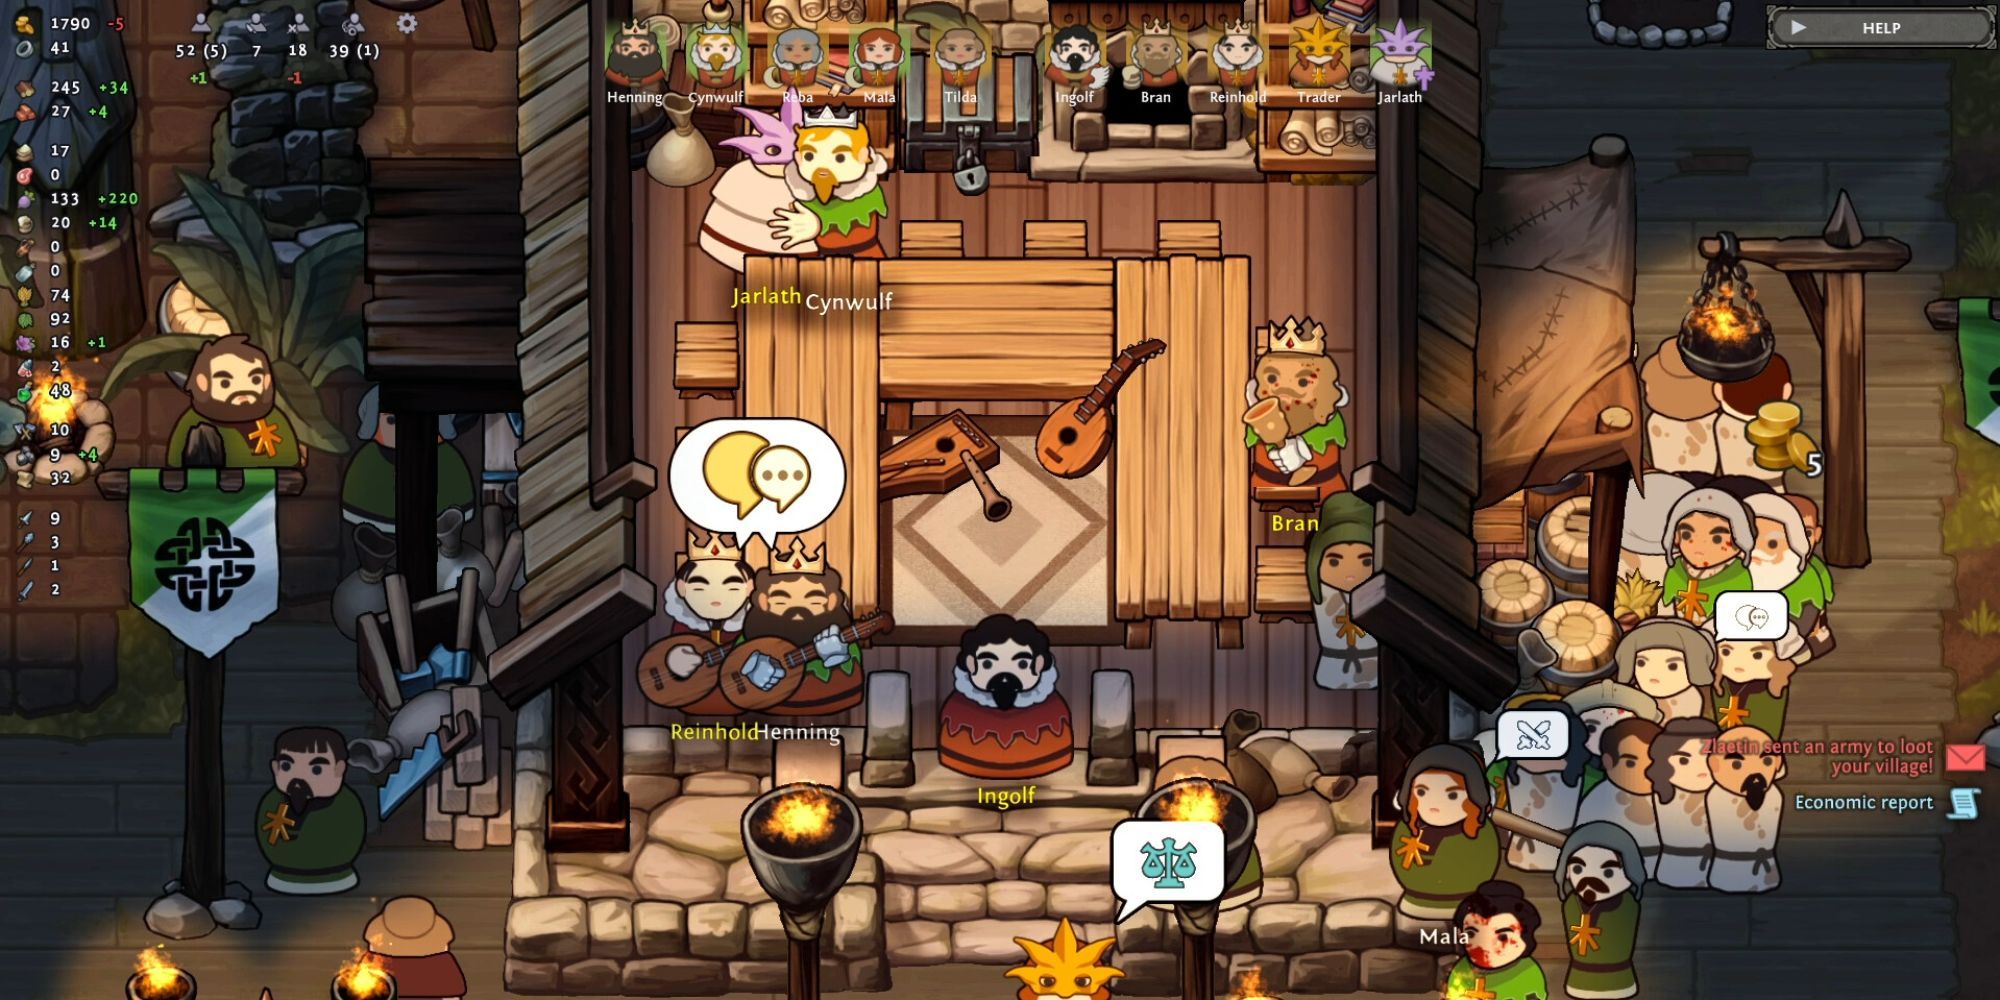 A tavern in Norland